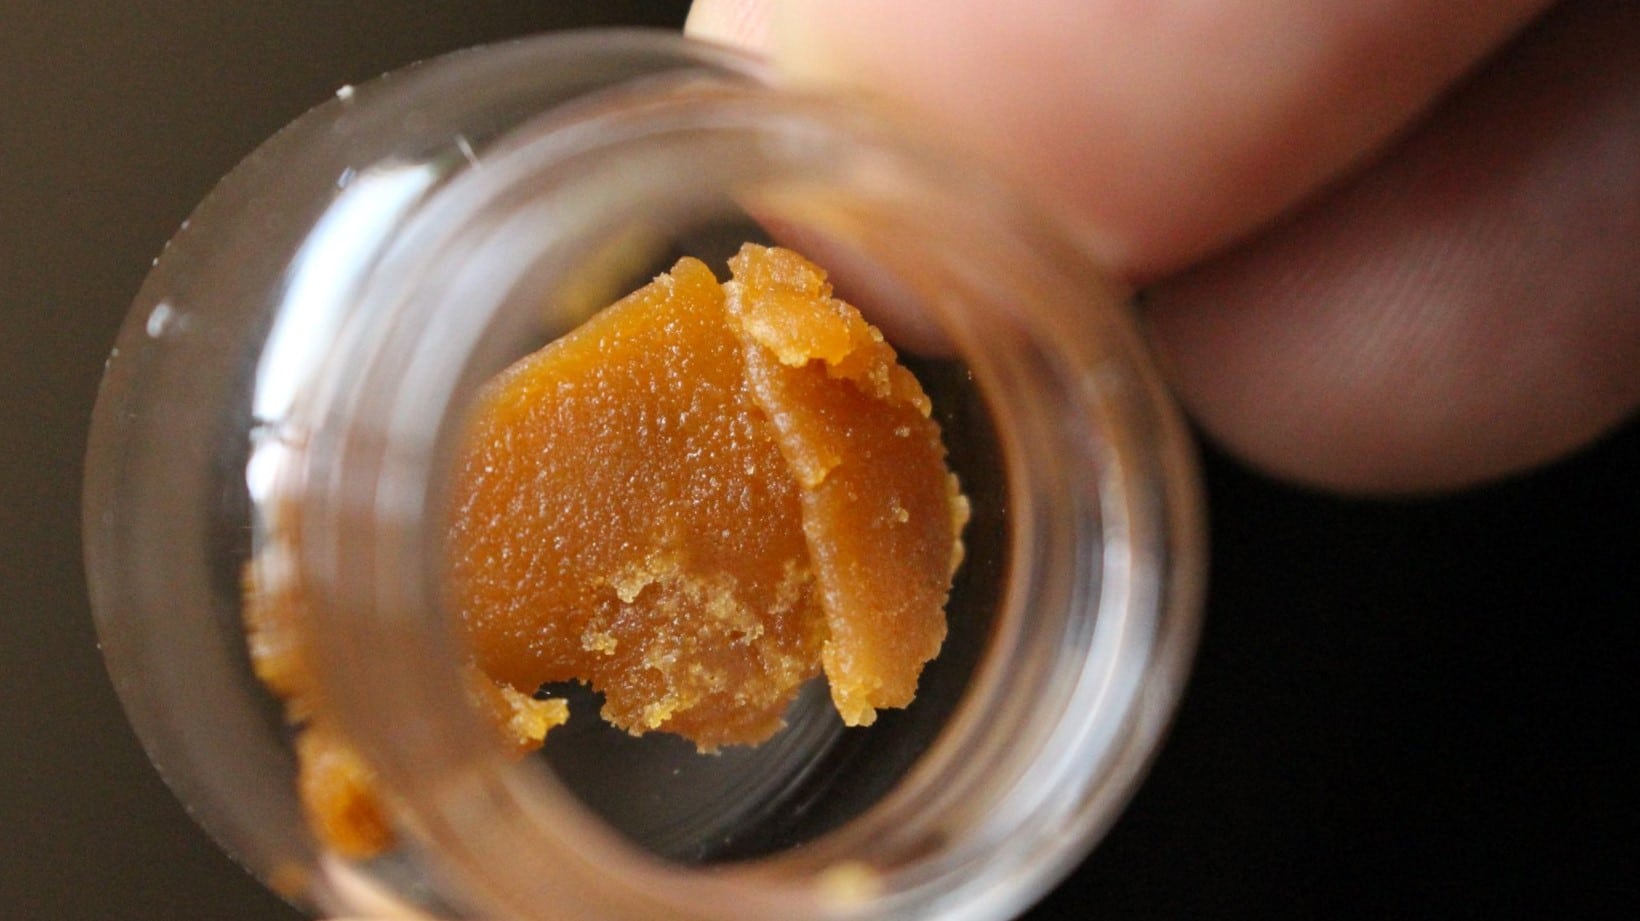 Exploring the Potential of HHC Wax: A Concentrated Cannabis Extract